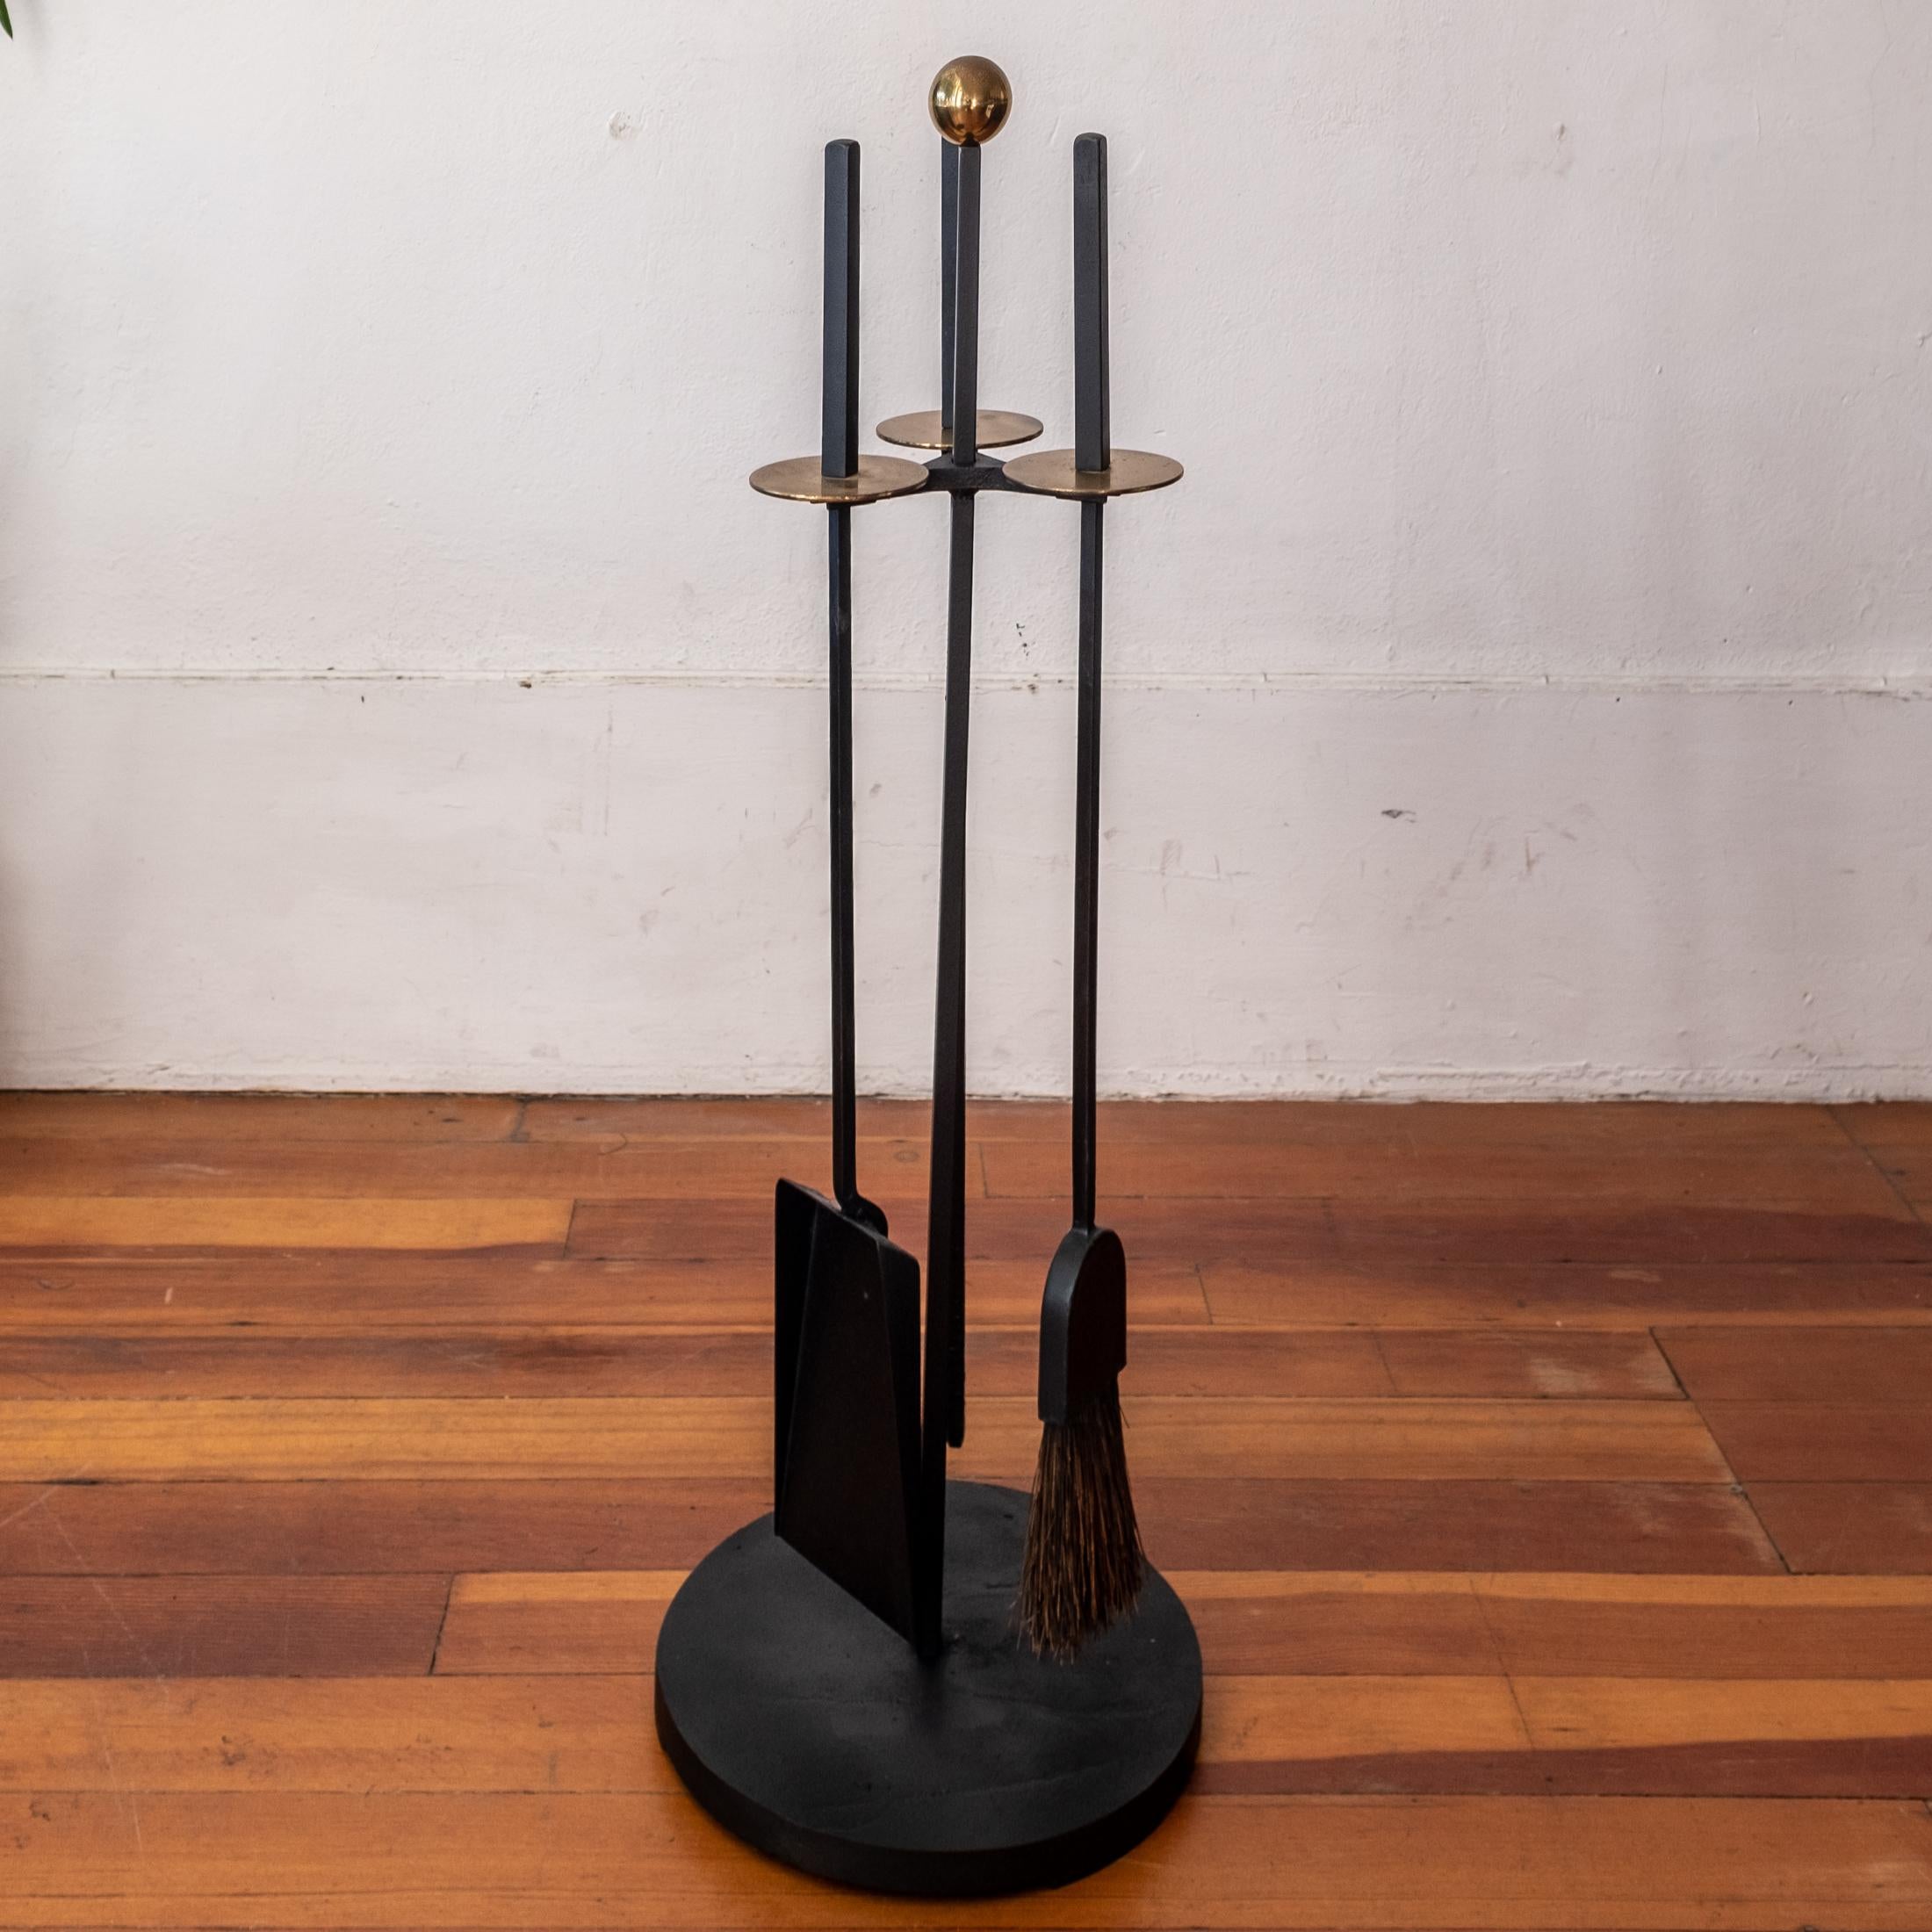 A set of modernist solid iron fireplace tools with solid brass discs and ball. The set includes a shovel, broom and poker. High quality and substantial construction with the original finish. 1950s

The set was designed by California Designer Mel